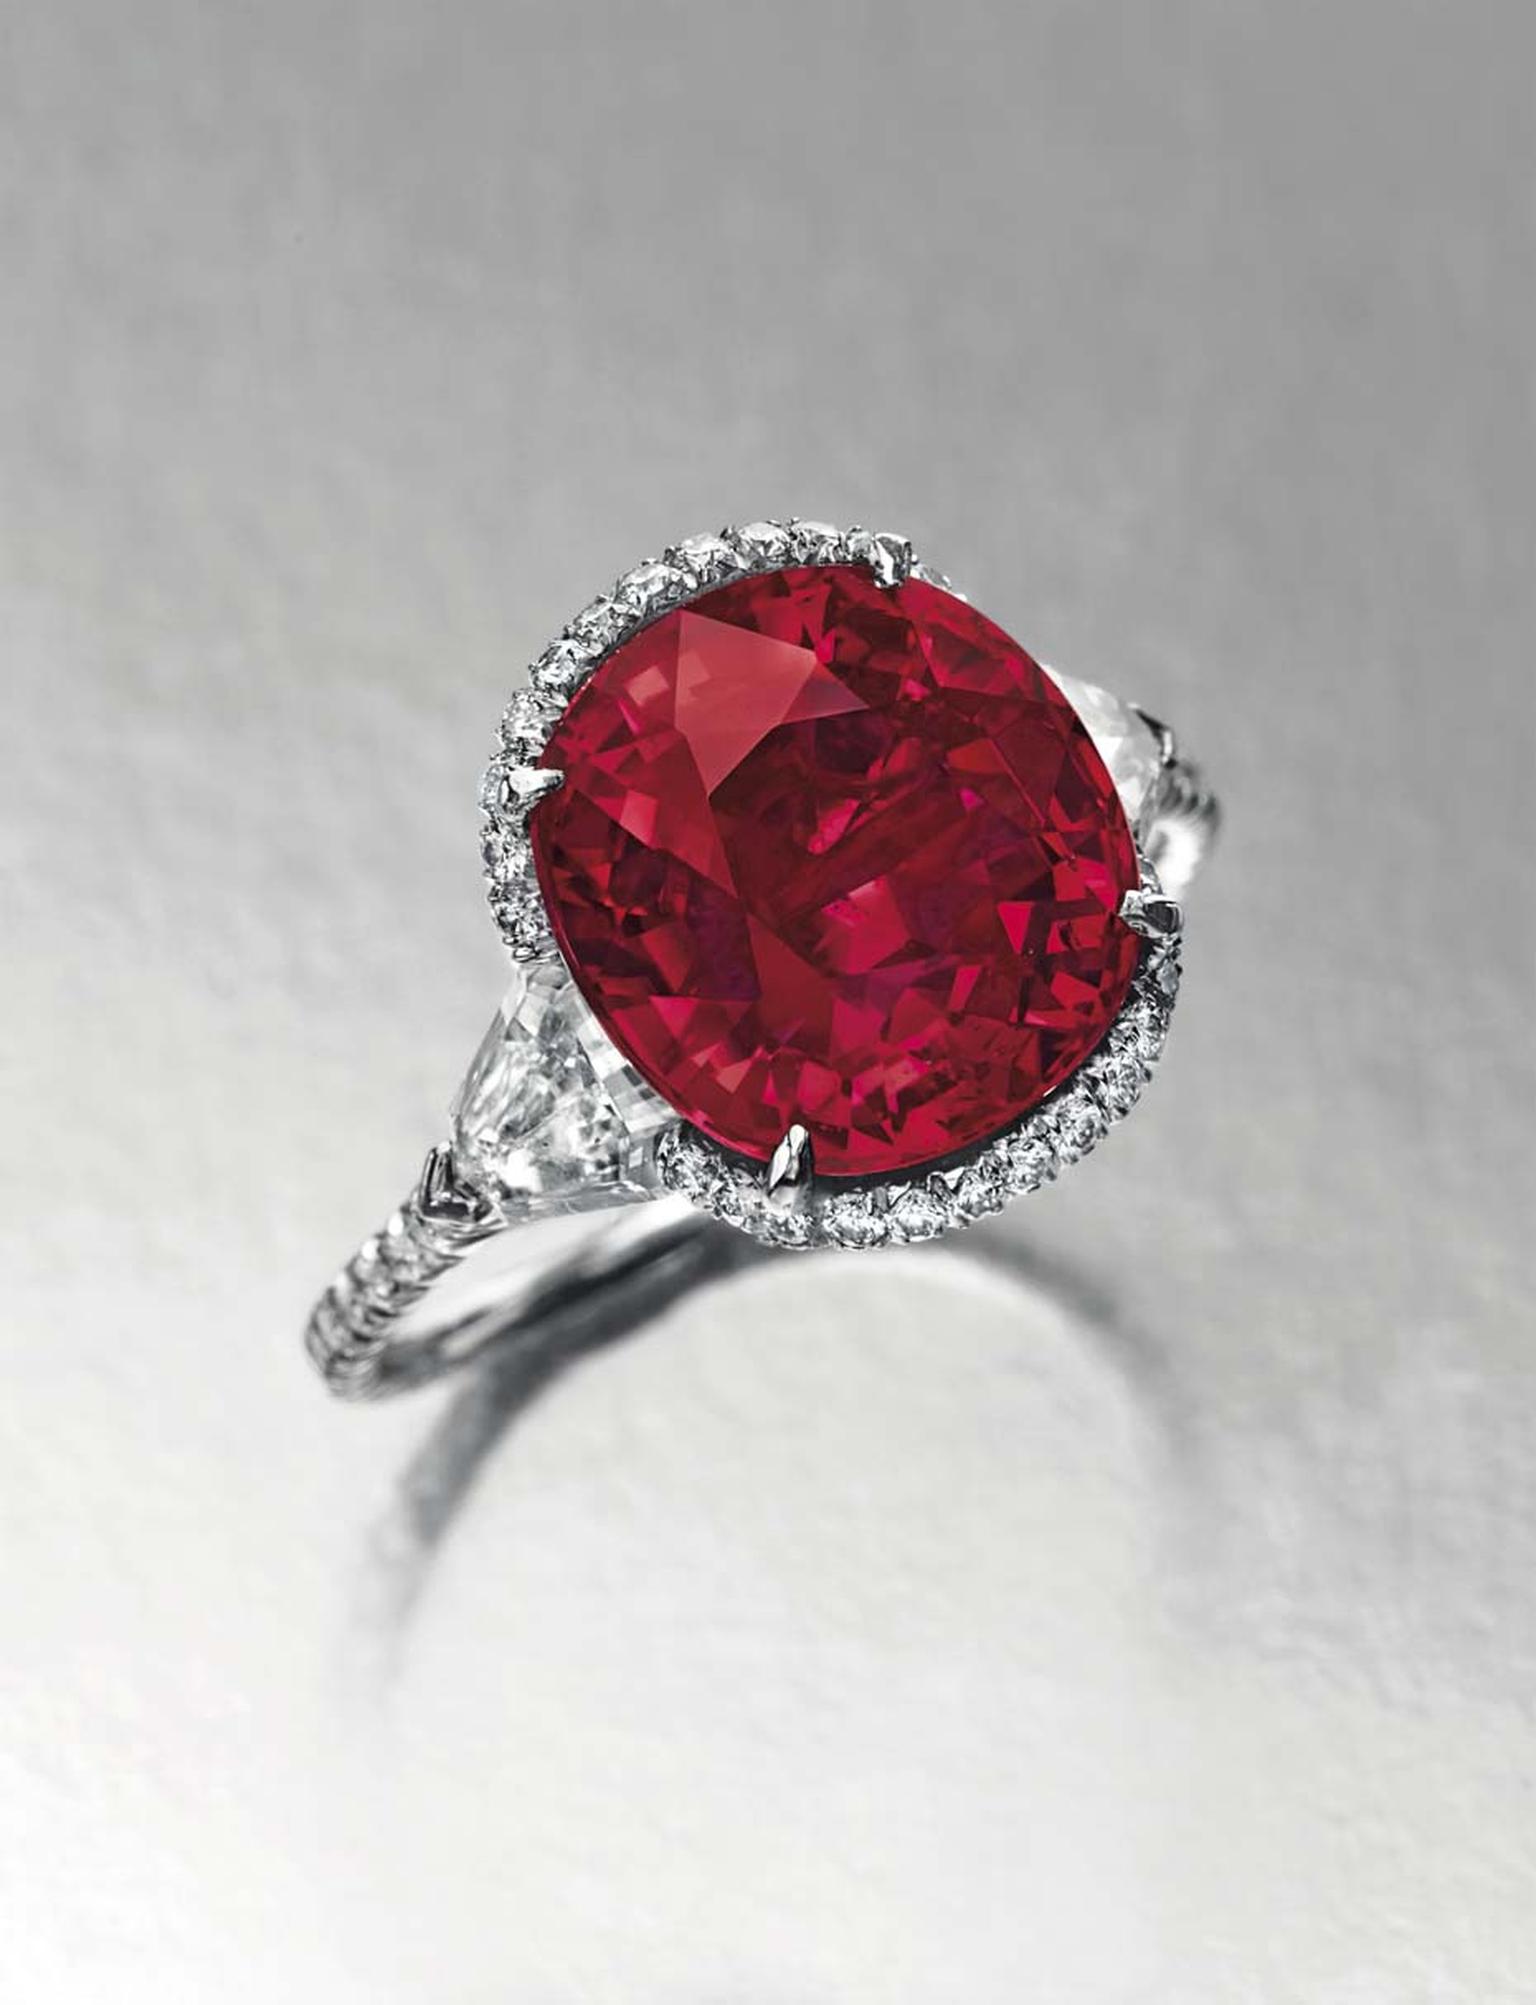 Lot 129, a 6.25ct cushion-cut Burmese ruby and diamond ring, from the private collection of animal rights campaigner Riki Shaw